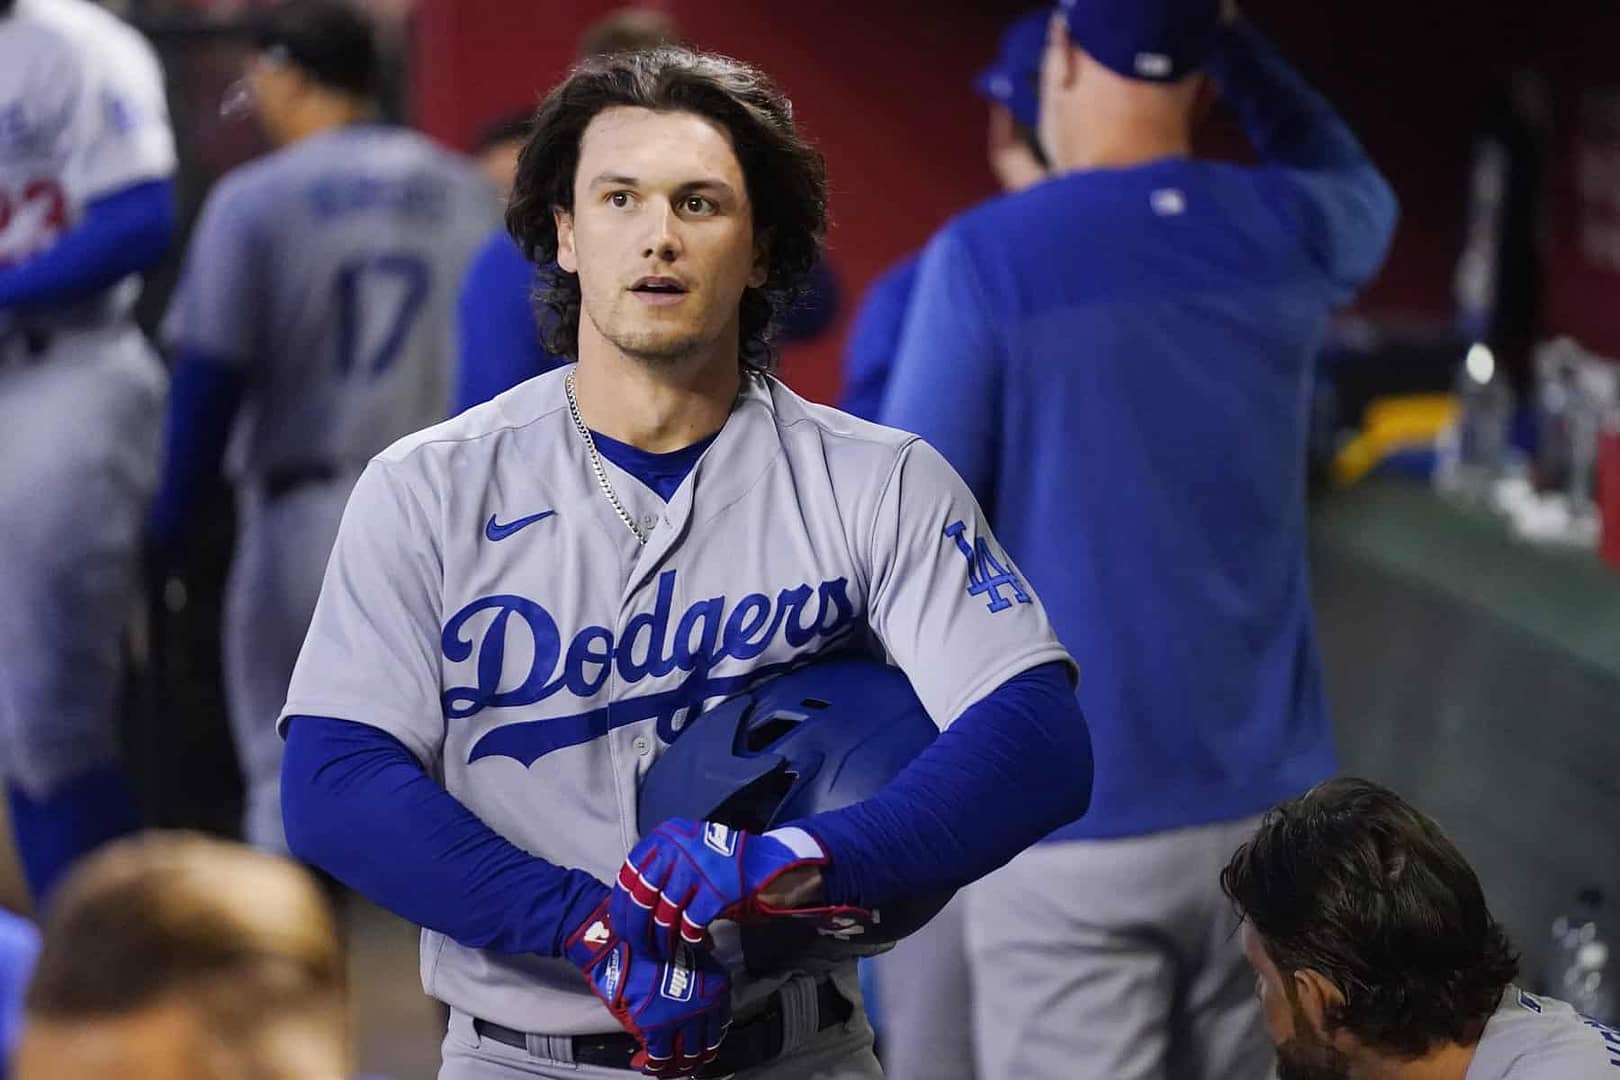 Home Run Picks & Bets Today: The Dodgers Player to Target (July 2)